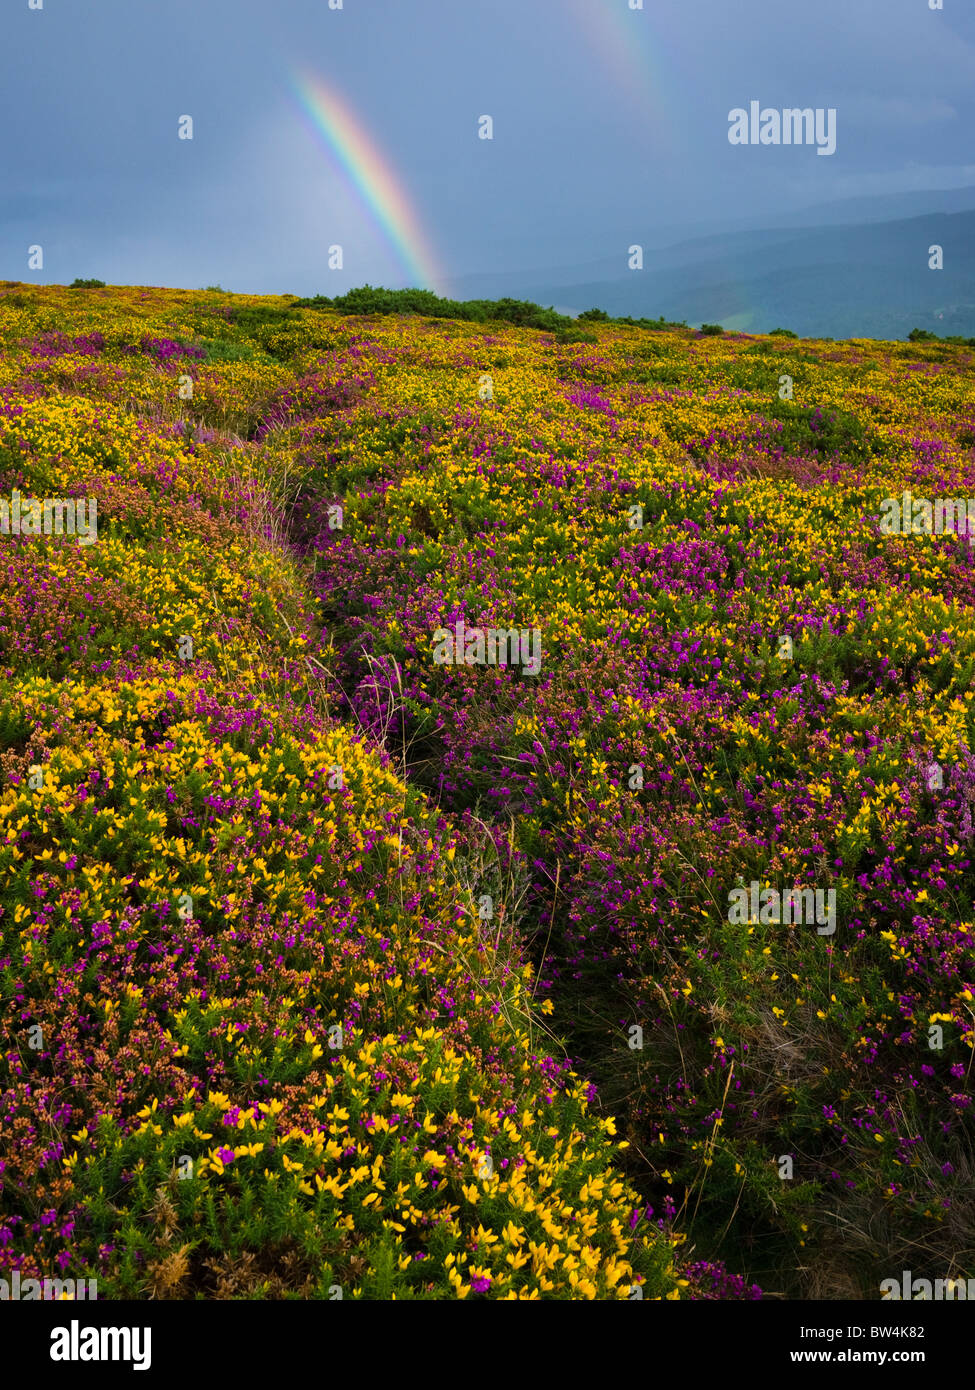 Double rainbow over Heather and Gorse on North Hill in the Exmoor National Park, Selworthy, Somerset, England. Stock Photo